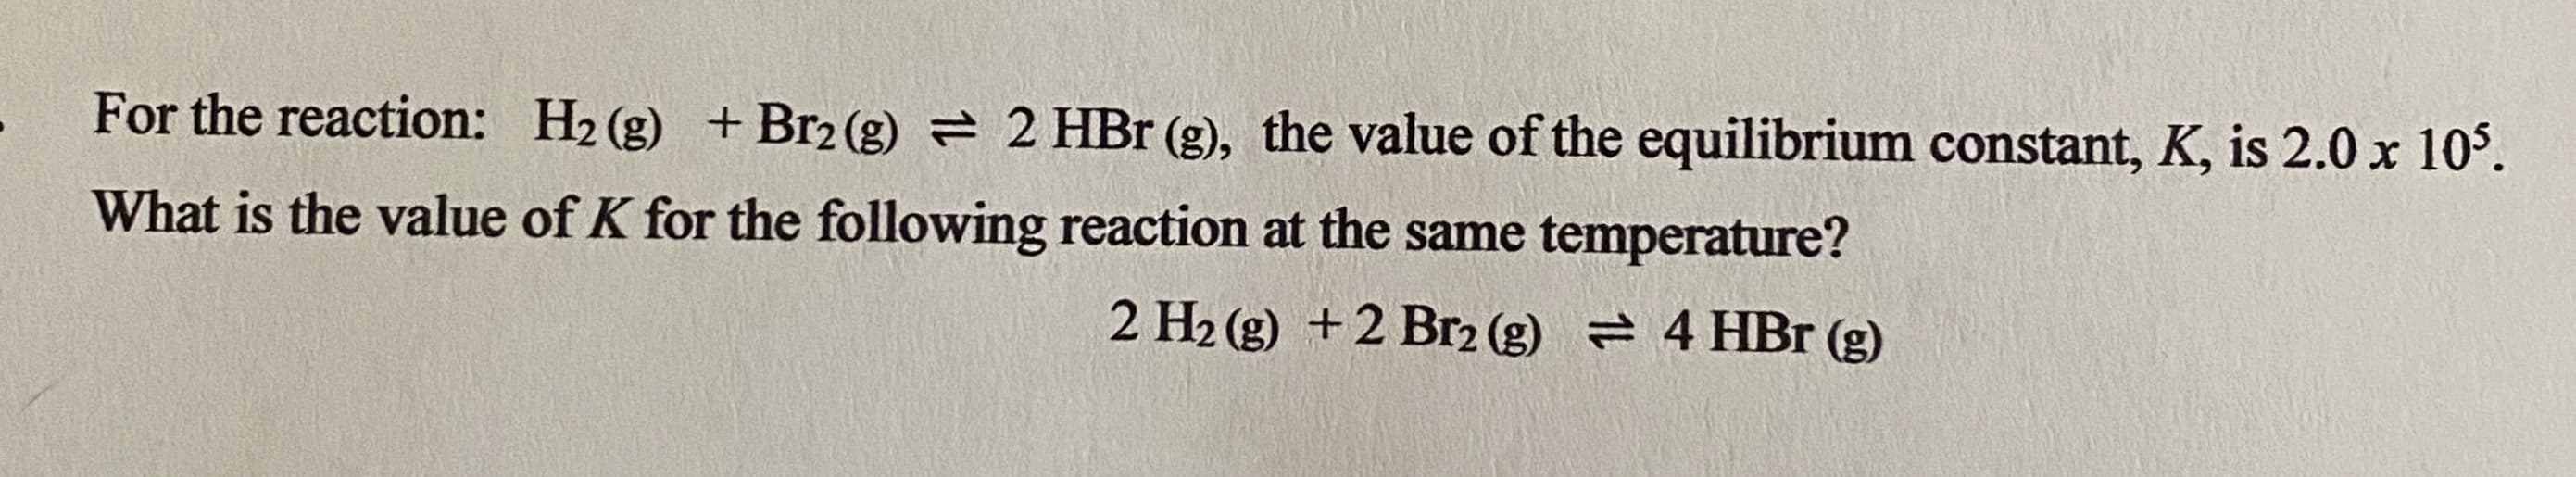 For the reaction: H2 (g) +Br2 (g) = 2 HBr (g), the value of the equilibrium constant, K, is 2.0 x 10'.
What is the value of K for the following reaction at the same temperature?
2 H2 (g) +2 Br2 (g) = 4 HBr (g)
